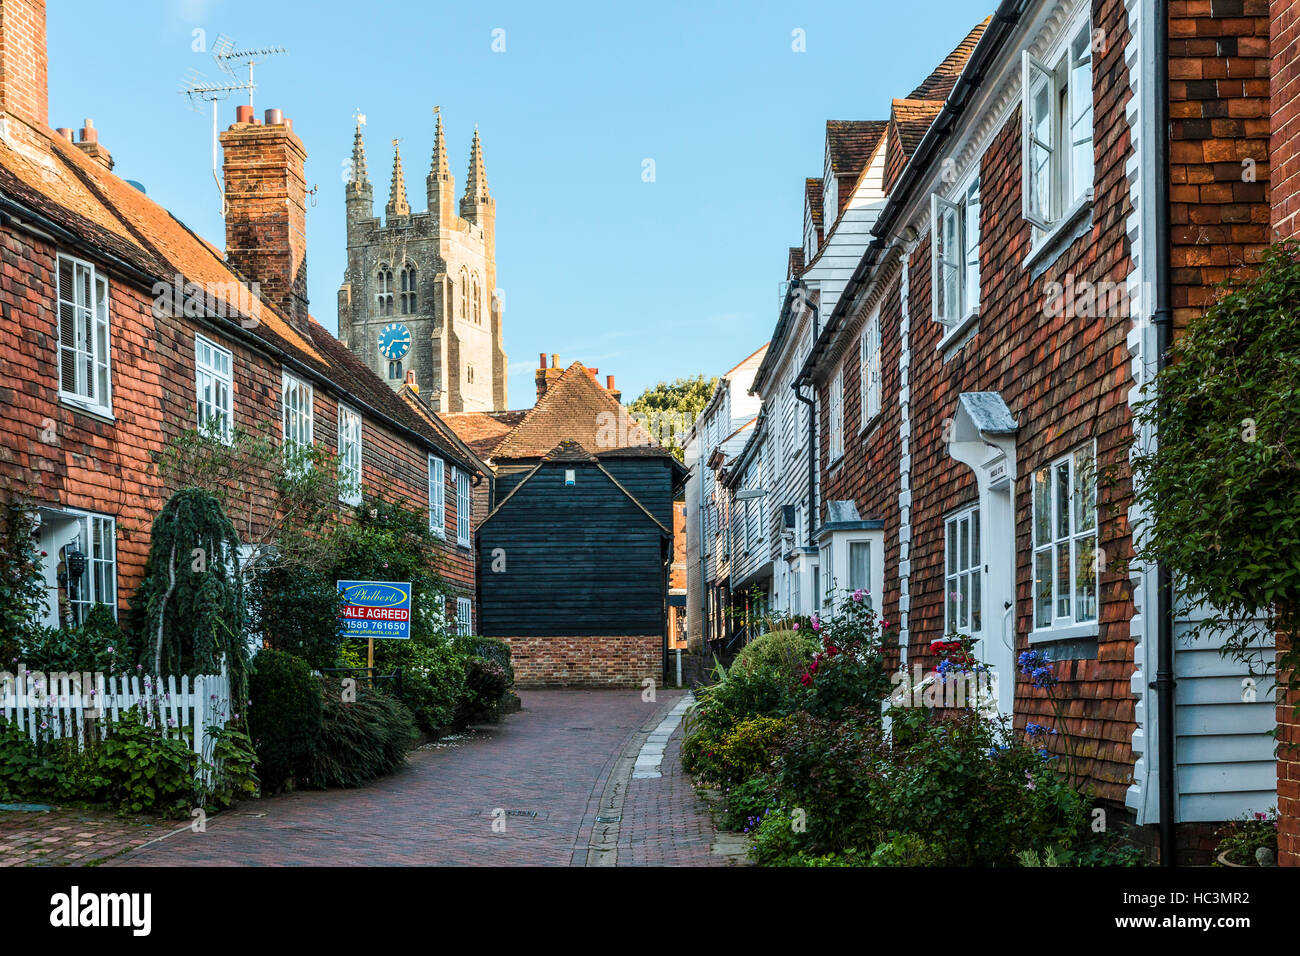 England, Tenterden. 'Six Field Path' a narrow cobbled road, housing and small front gardens on both sides. Church tower in background. Picturesque. Stock Photo